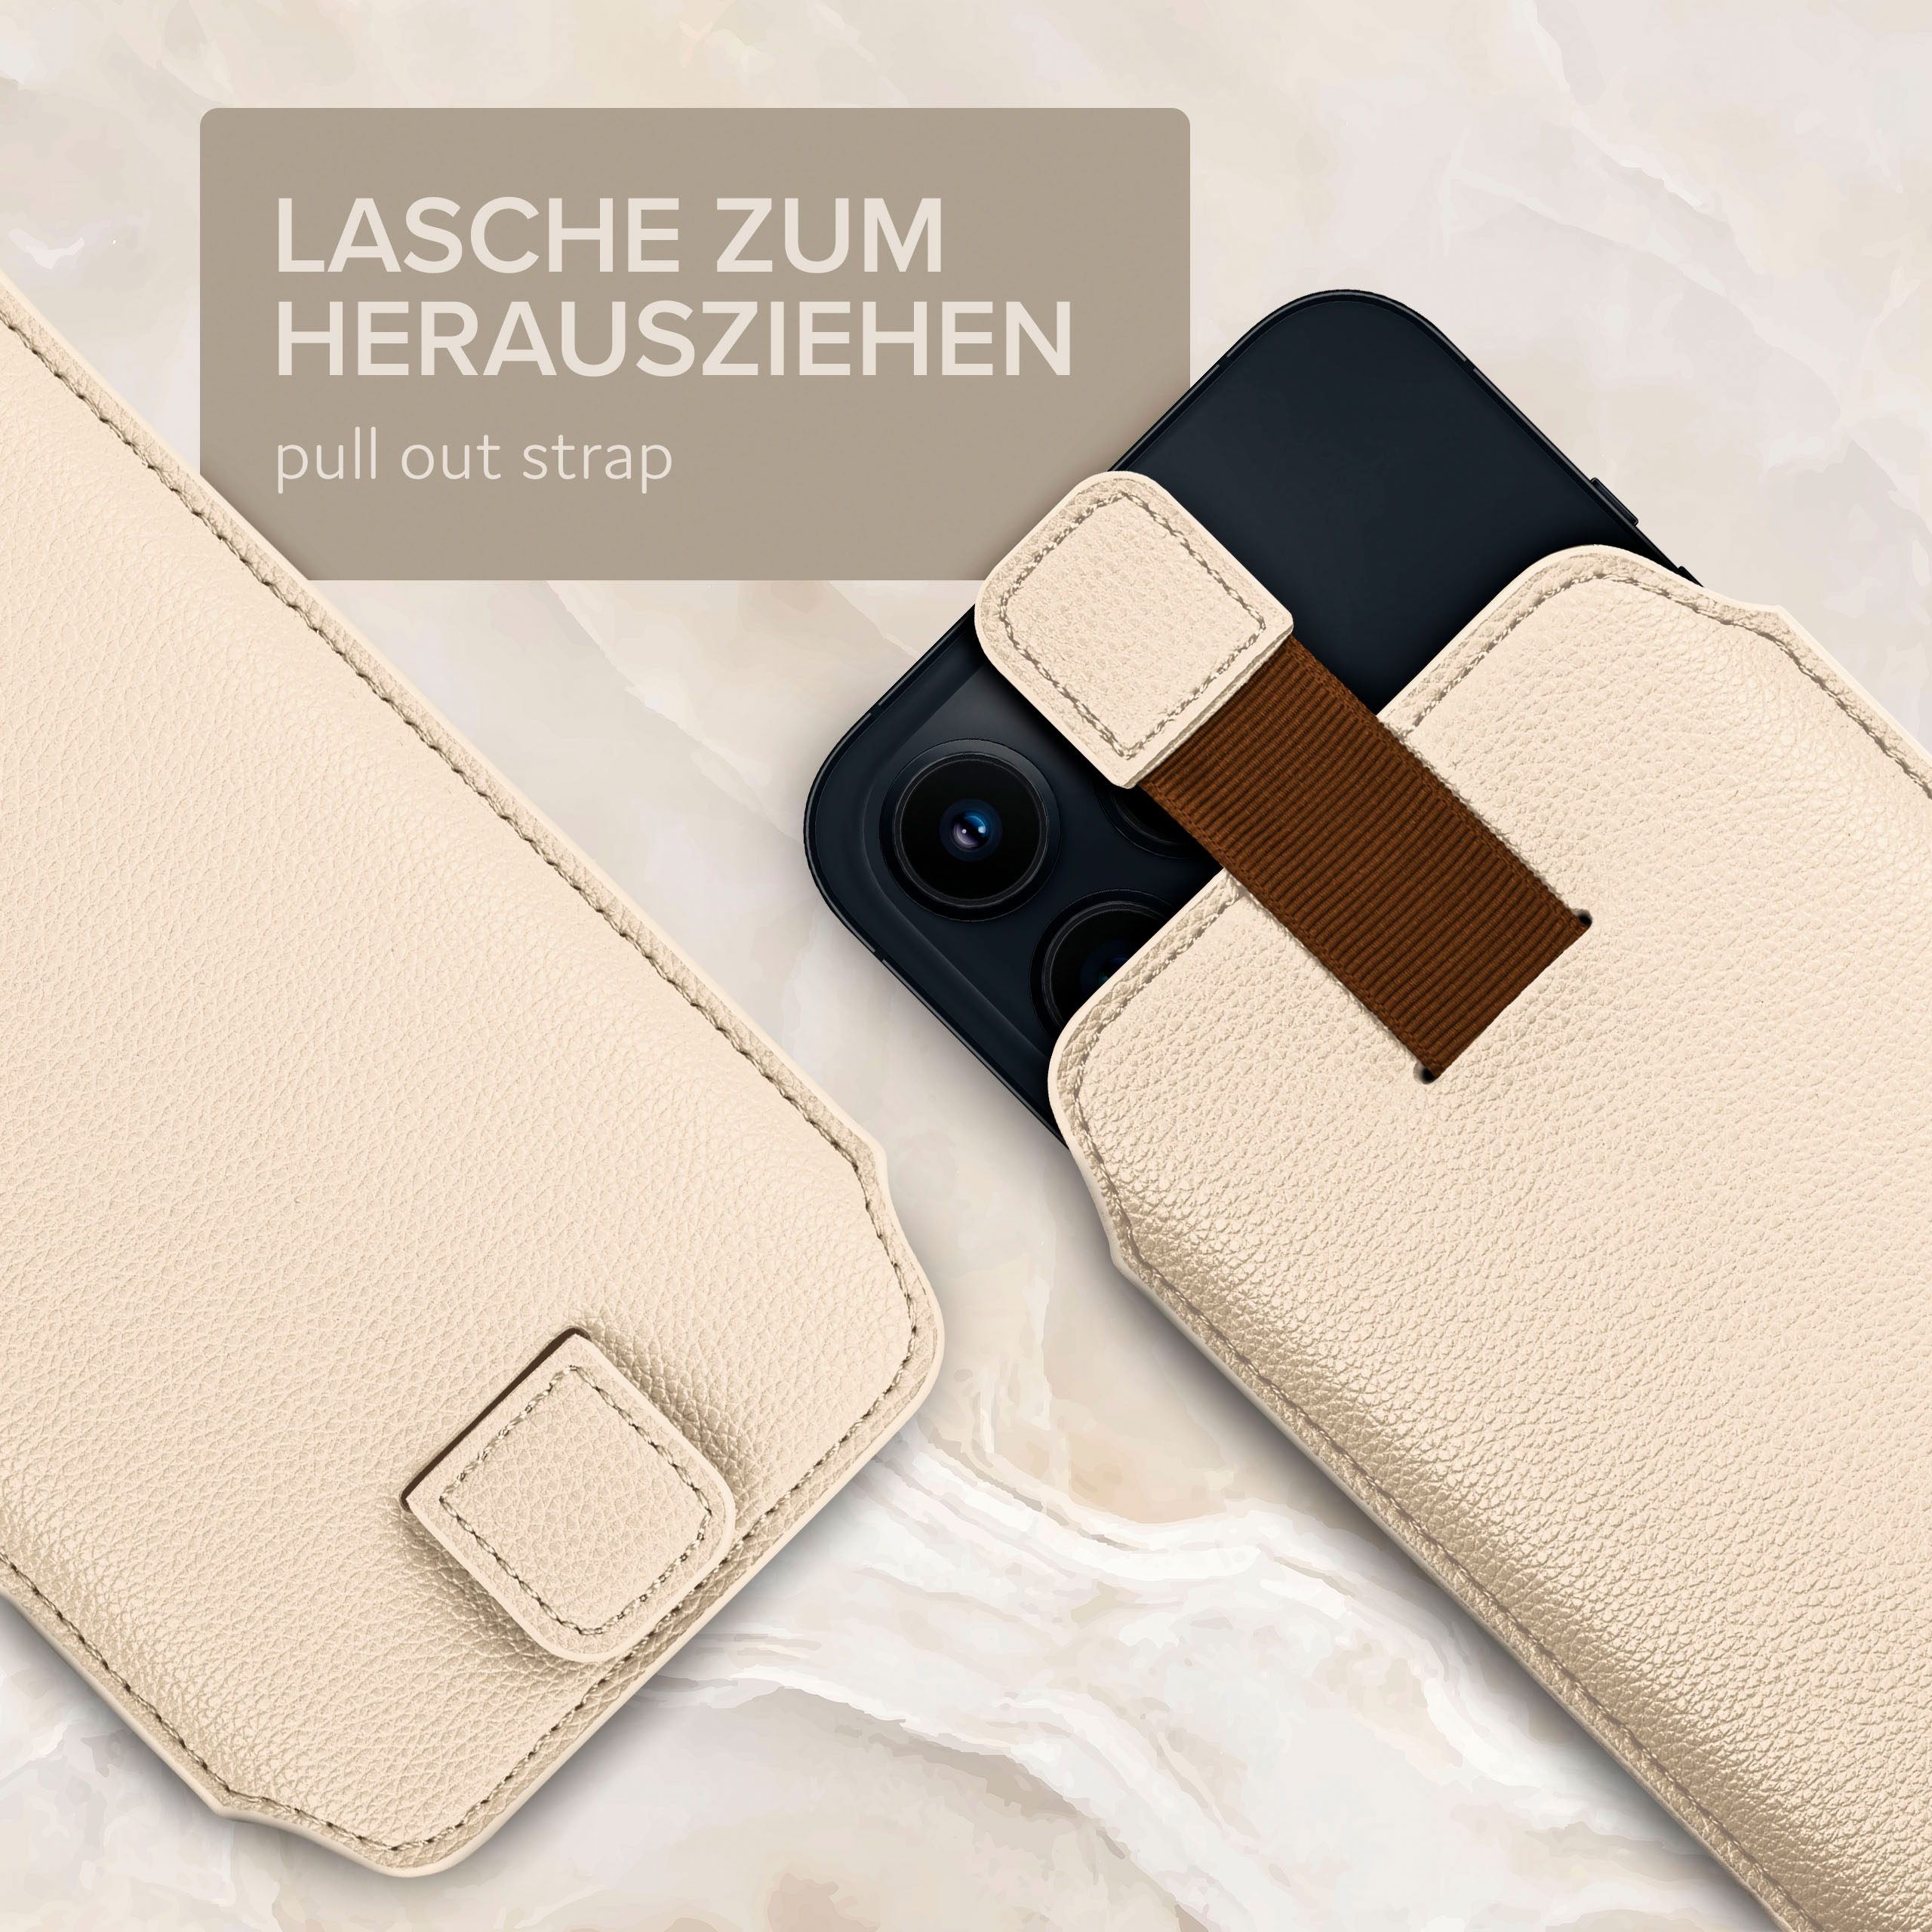 Compact, Cover, Full Xperia Z1 Creme Zuglasche, ONEFLOW Sony, Einsteckhülle mit